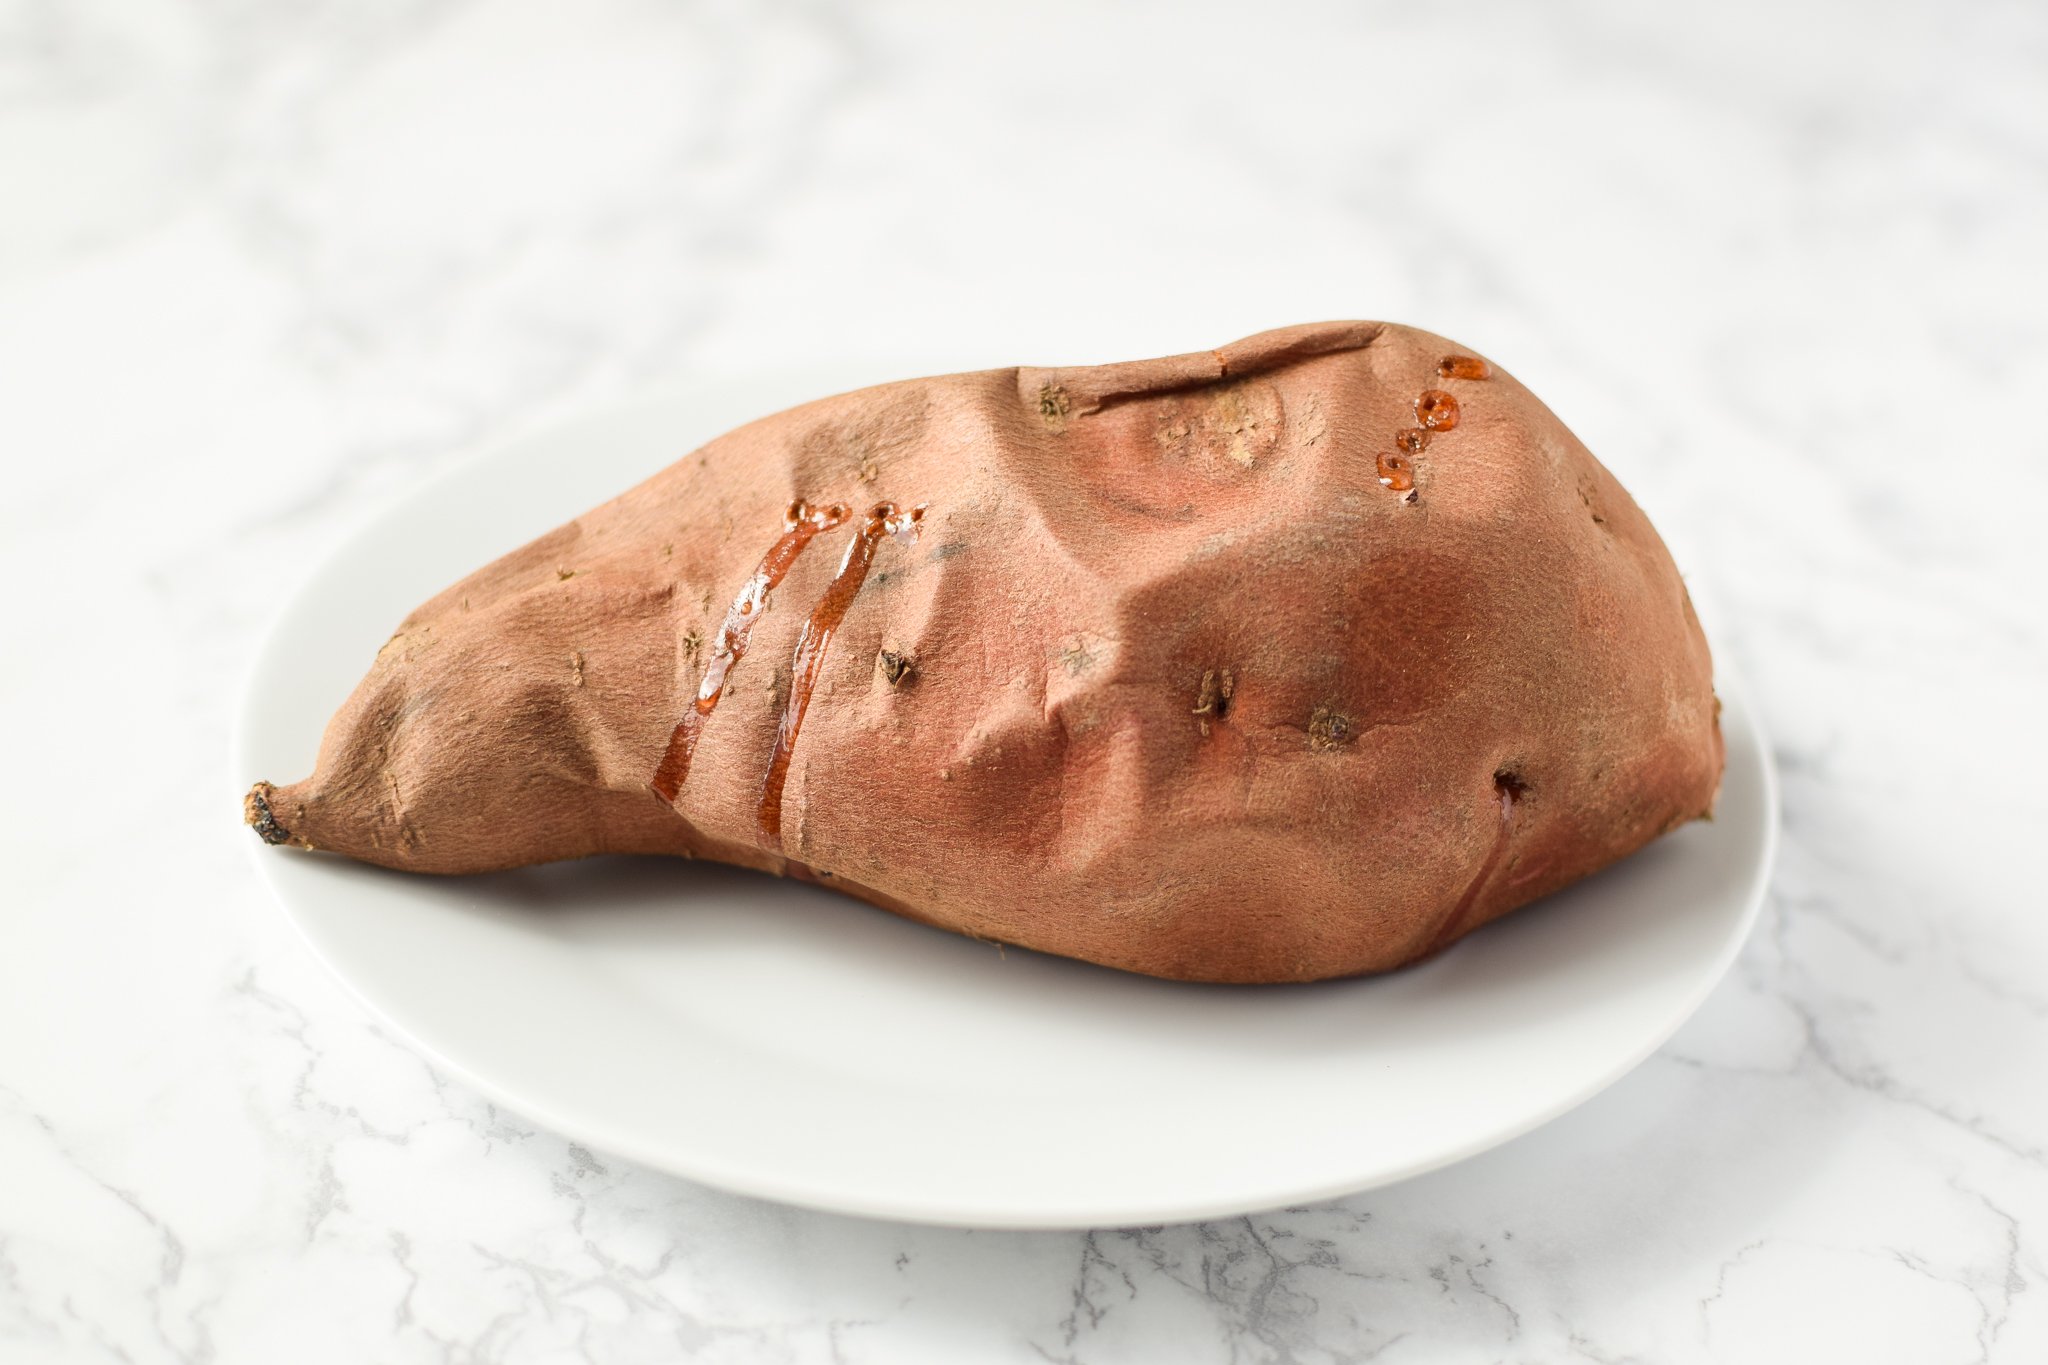 A baked sweet potato cooling on a white plate.